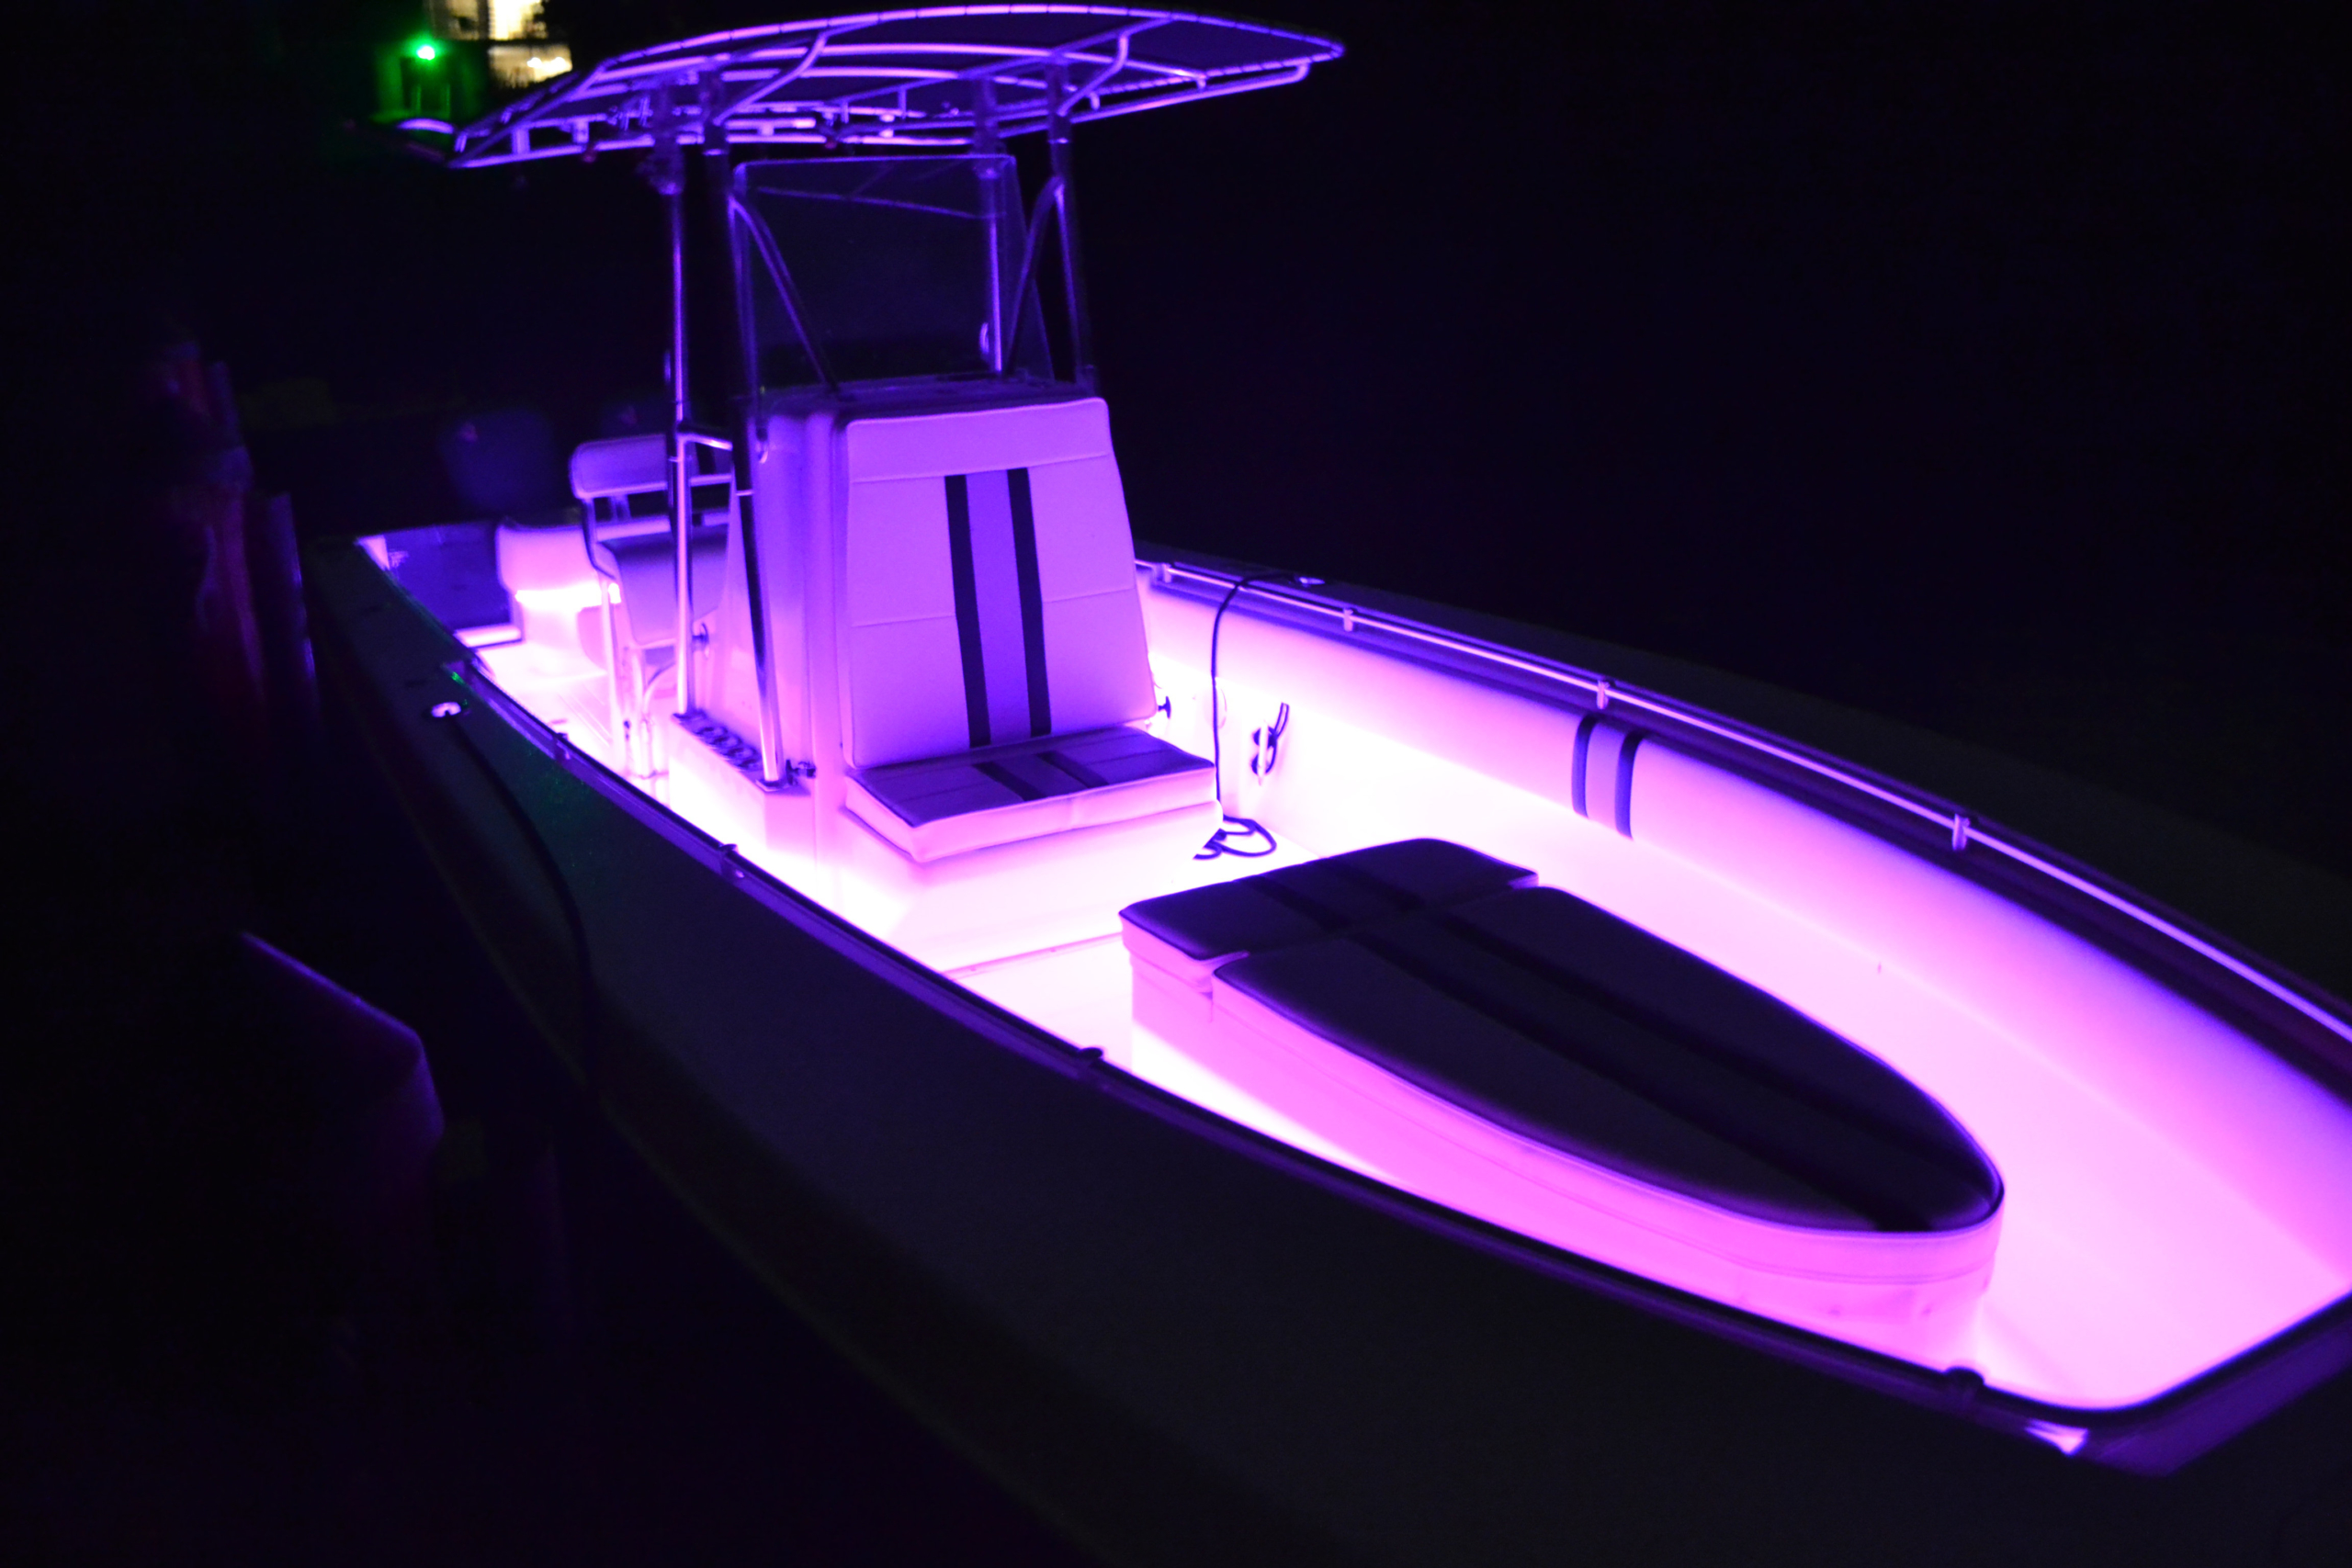 Colour changing Boat install